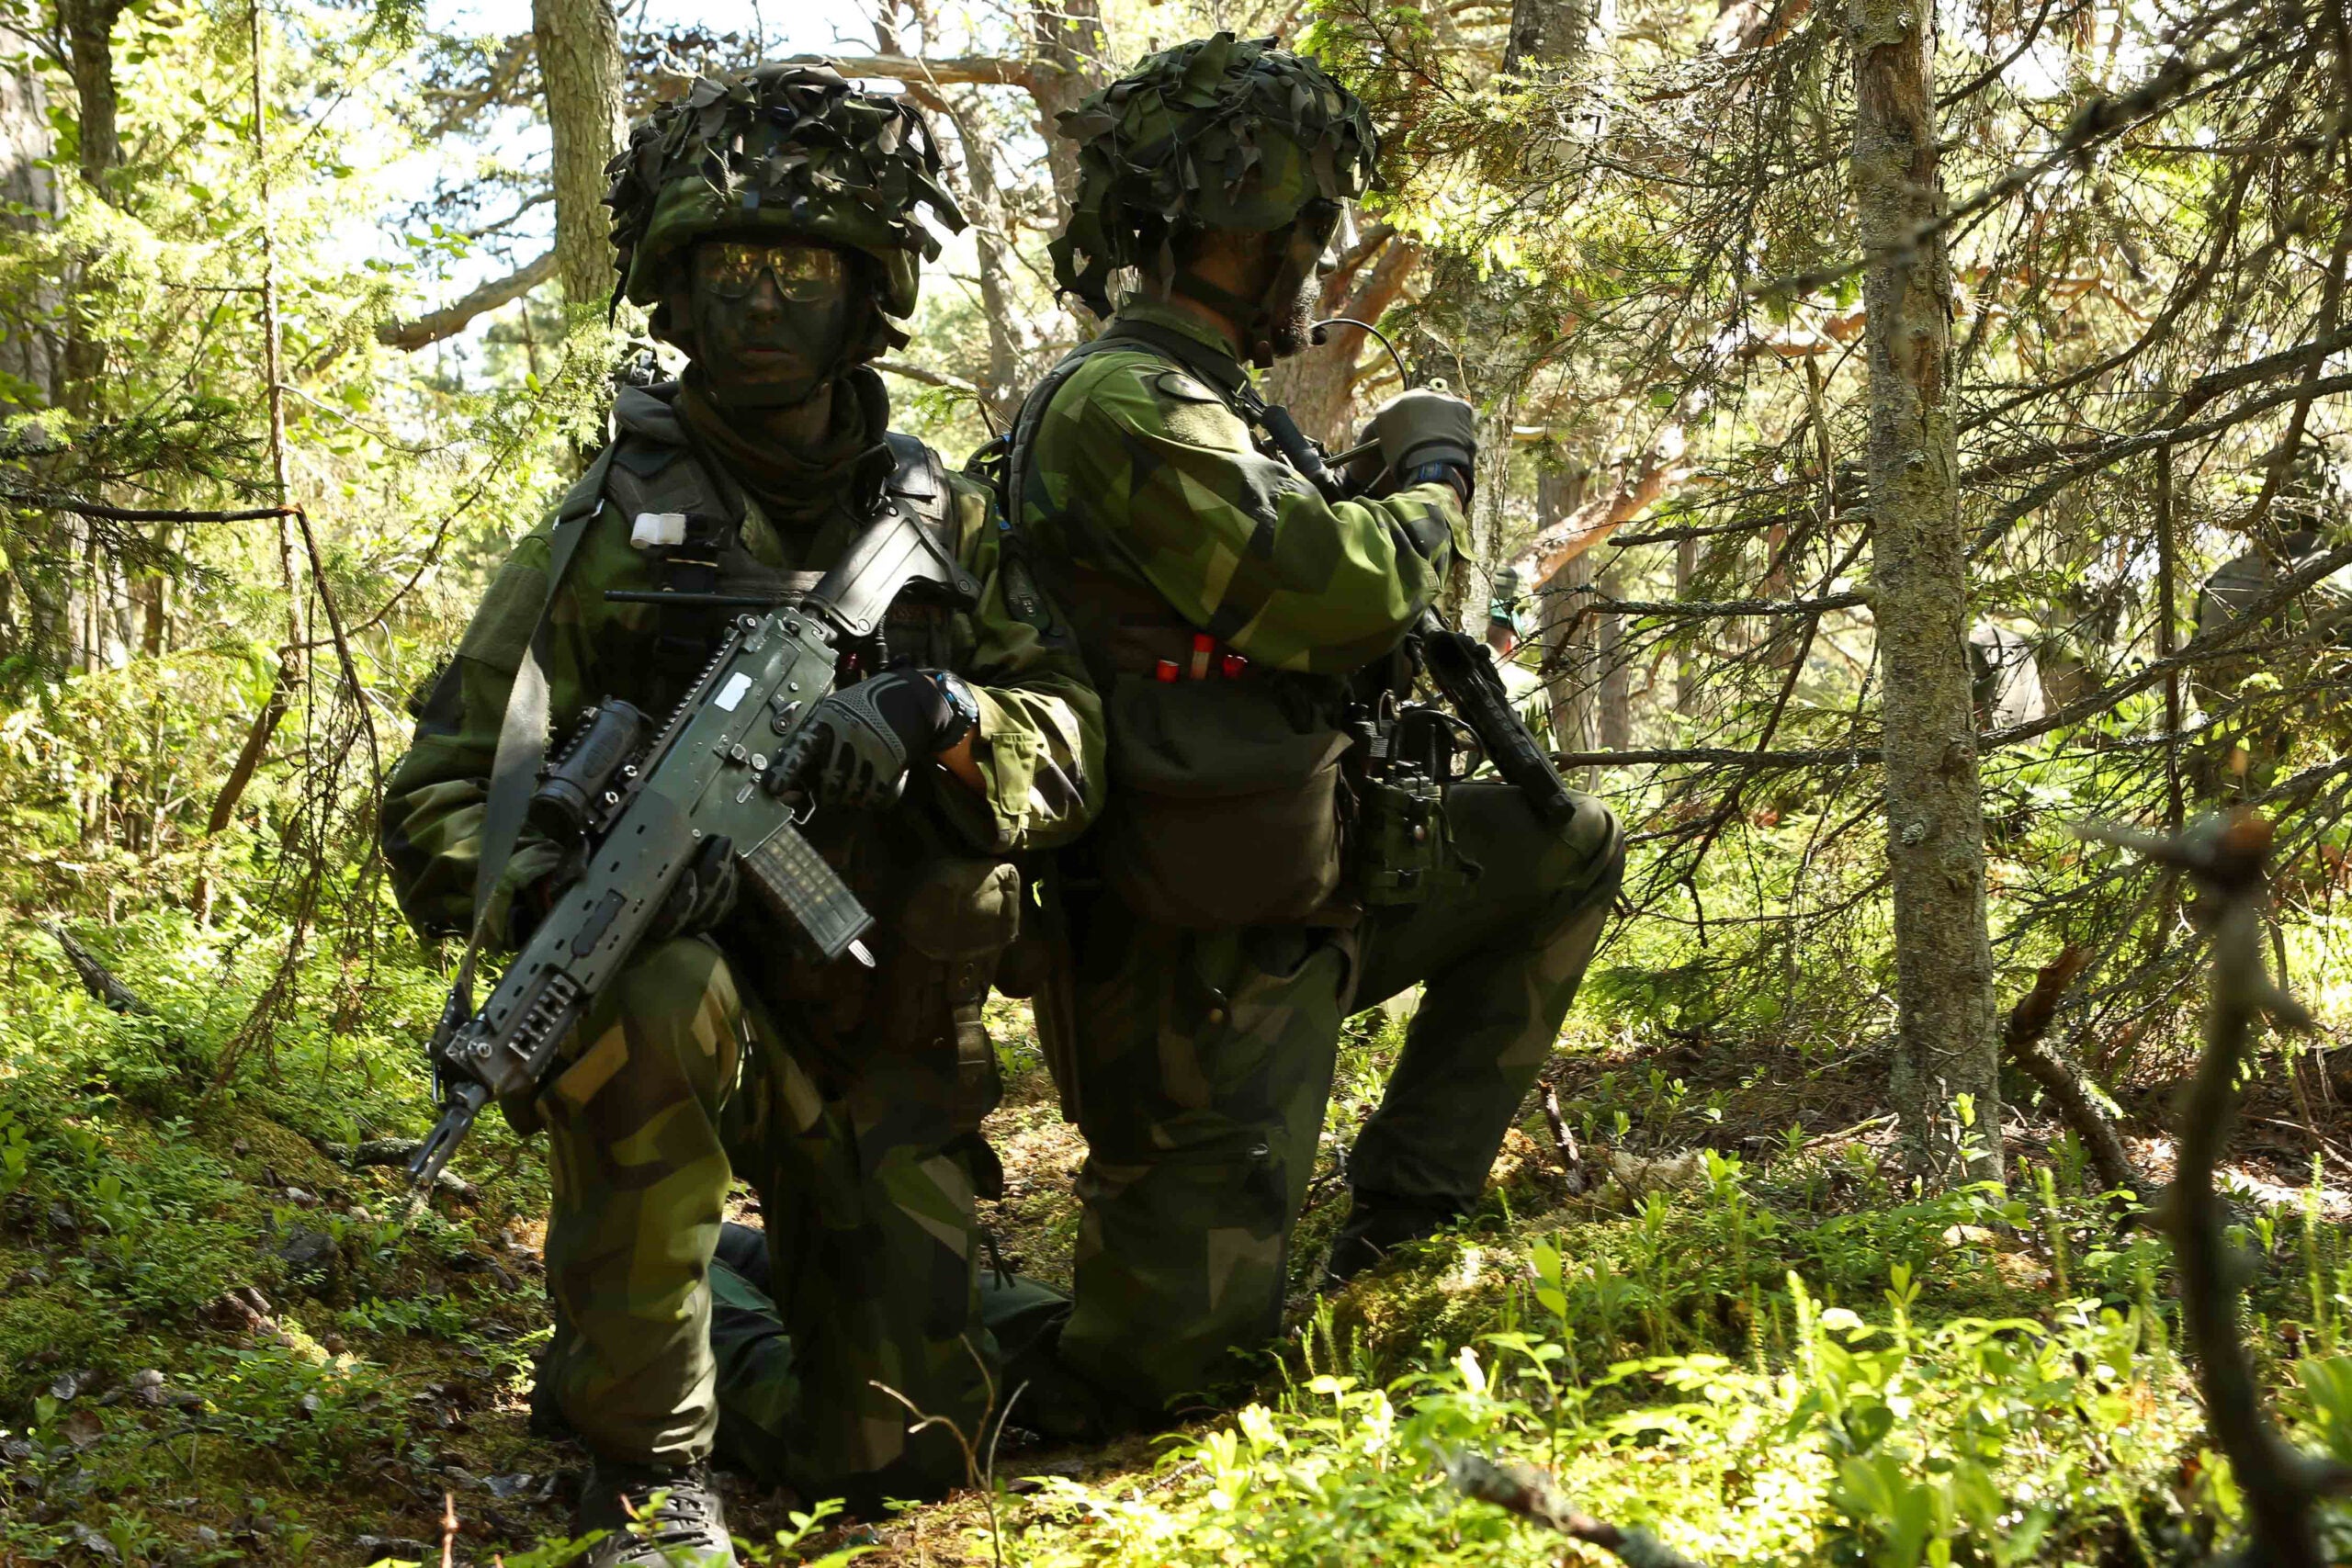 160608-N-PF515-003 UTO, Sweden (June 8, 2016) Swedish Marines from 2nd Amphibious Battalion are on a reconnaissance exercise during BALTOPS 2016 on the island of Uto, Sweden, June 8. BALTOPS is an annual recurring multinational exercise designed to improve interoperability, enhance flexibility, and demonstrate the resolve of allied and partner nations to defend the Baltic region.  (U.S. Navy photo by Mass Communication Specialist 1st Class America A. Henry/ Released)